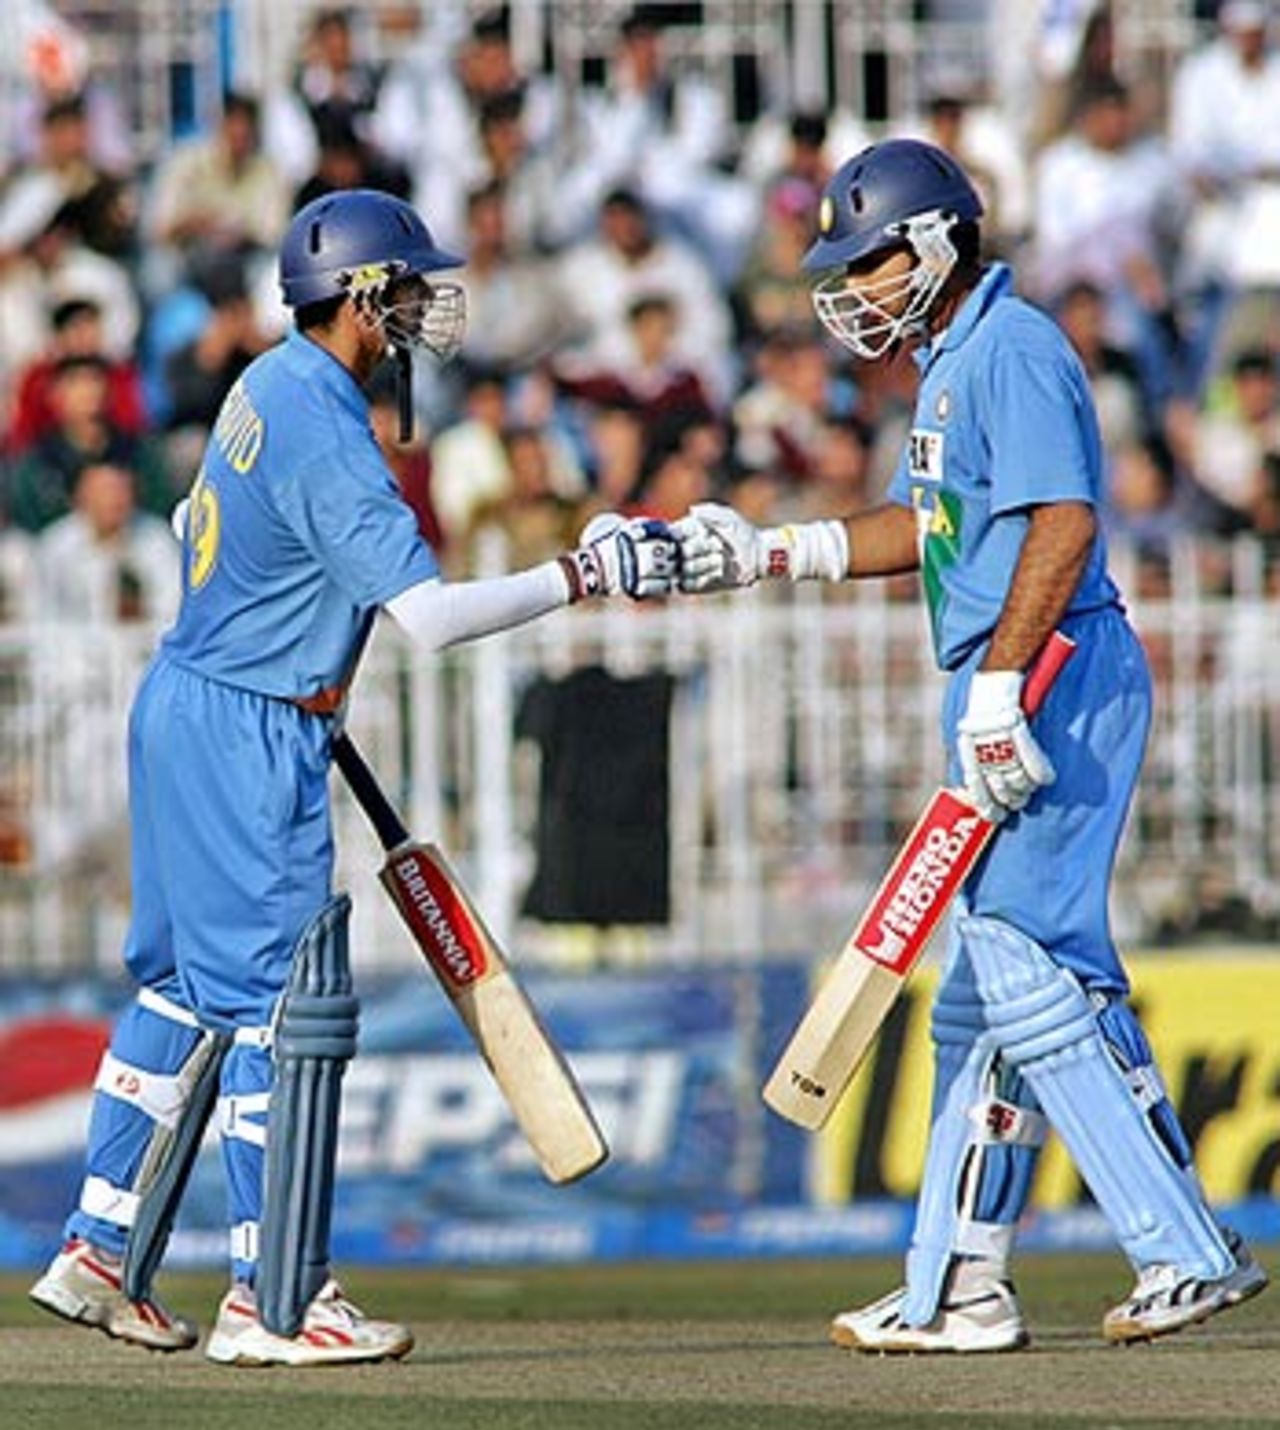 Rahul Dravid and Yuvraj Singh added 118 for the third wicket in India's seven-wicket victory, Pakistan v India, 2nd ODI, Rawalpindi, February 11 2006